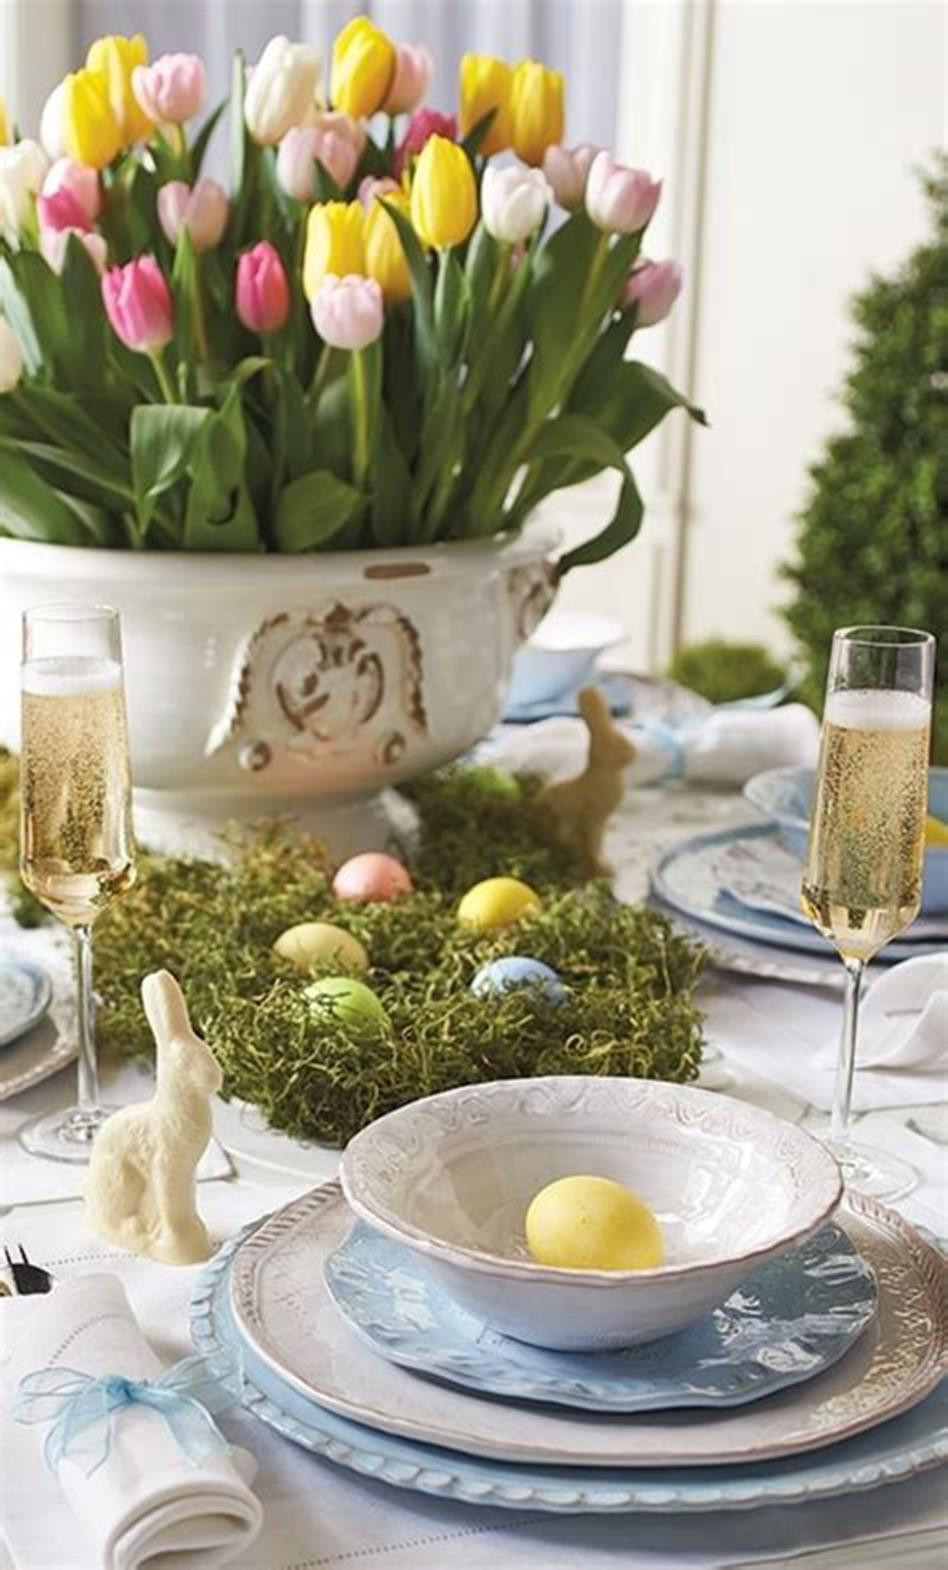 Easter Table Setting Ideas
 40 Beautiful DIY Easter Table Decorating Ideas for Spring